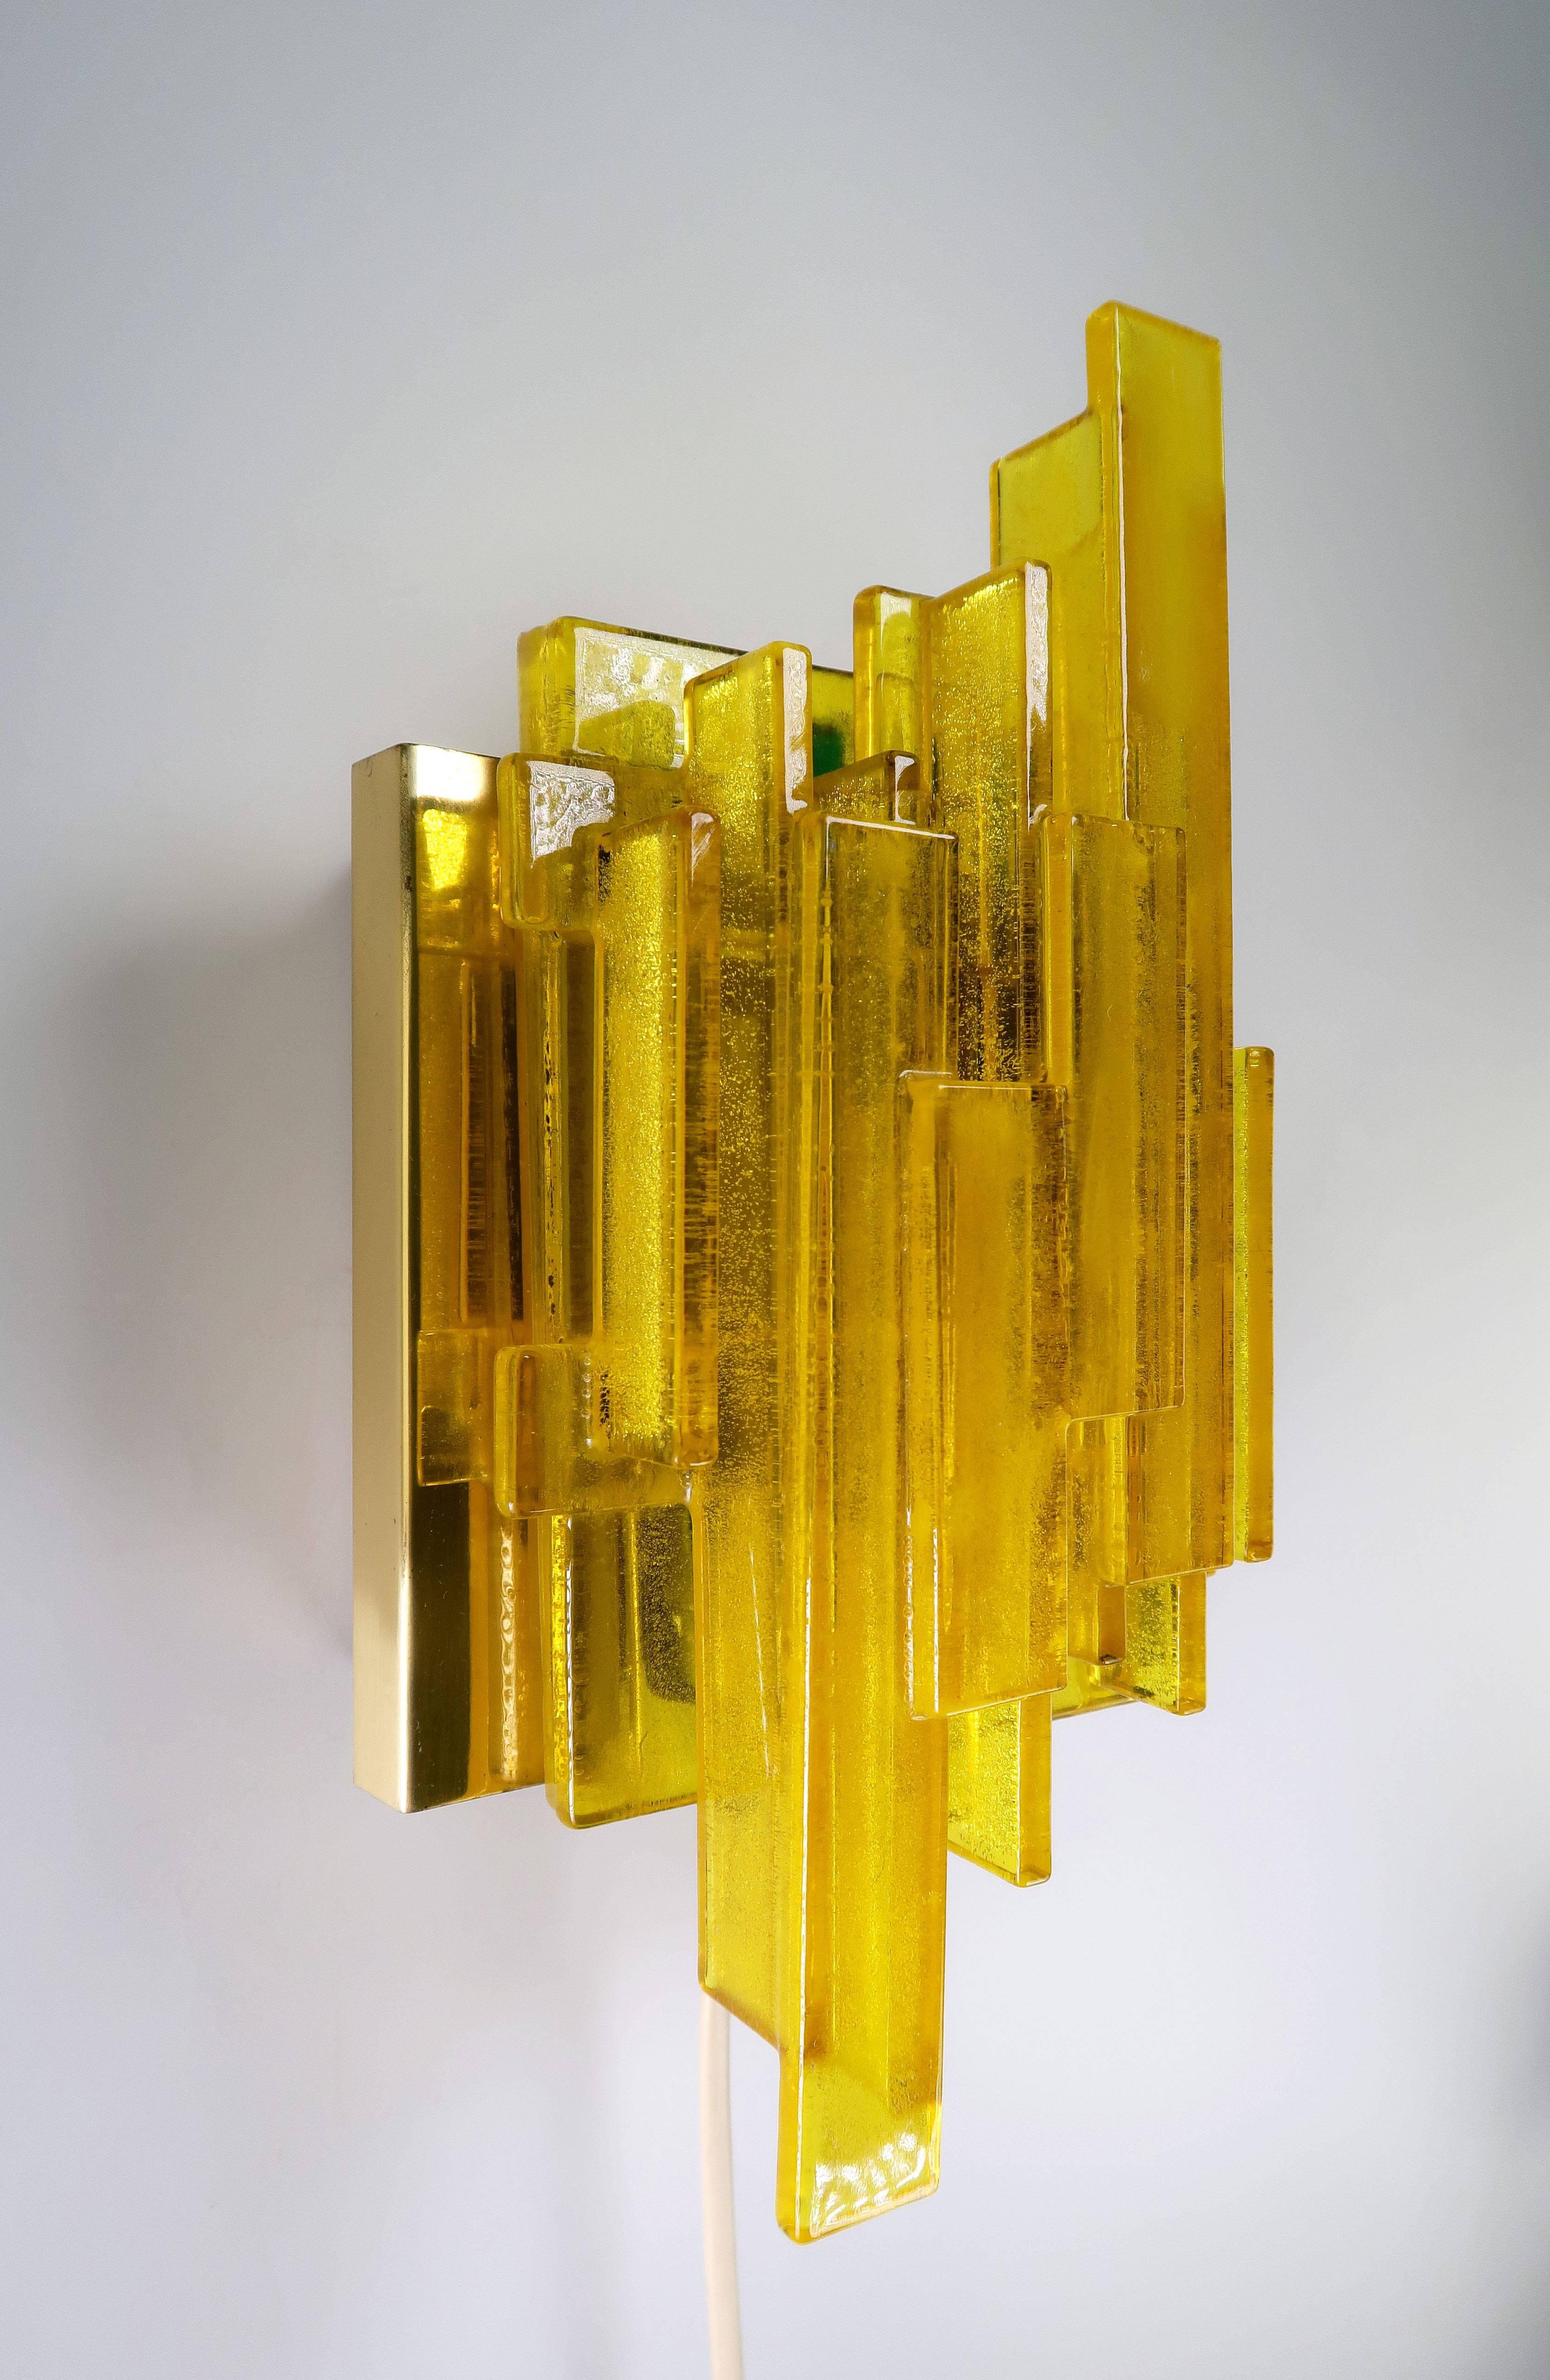 Set of two handmade yellow acrylic Space Age Scandinavian Mid Century Modern geometric wall lights by Danish designer Claus Bolby. Yellow acrylic resin of different shapes and sizes put together over a few elements of green acrylic creating a